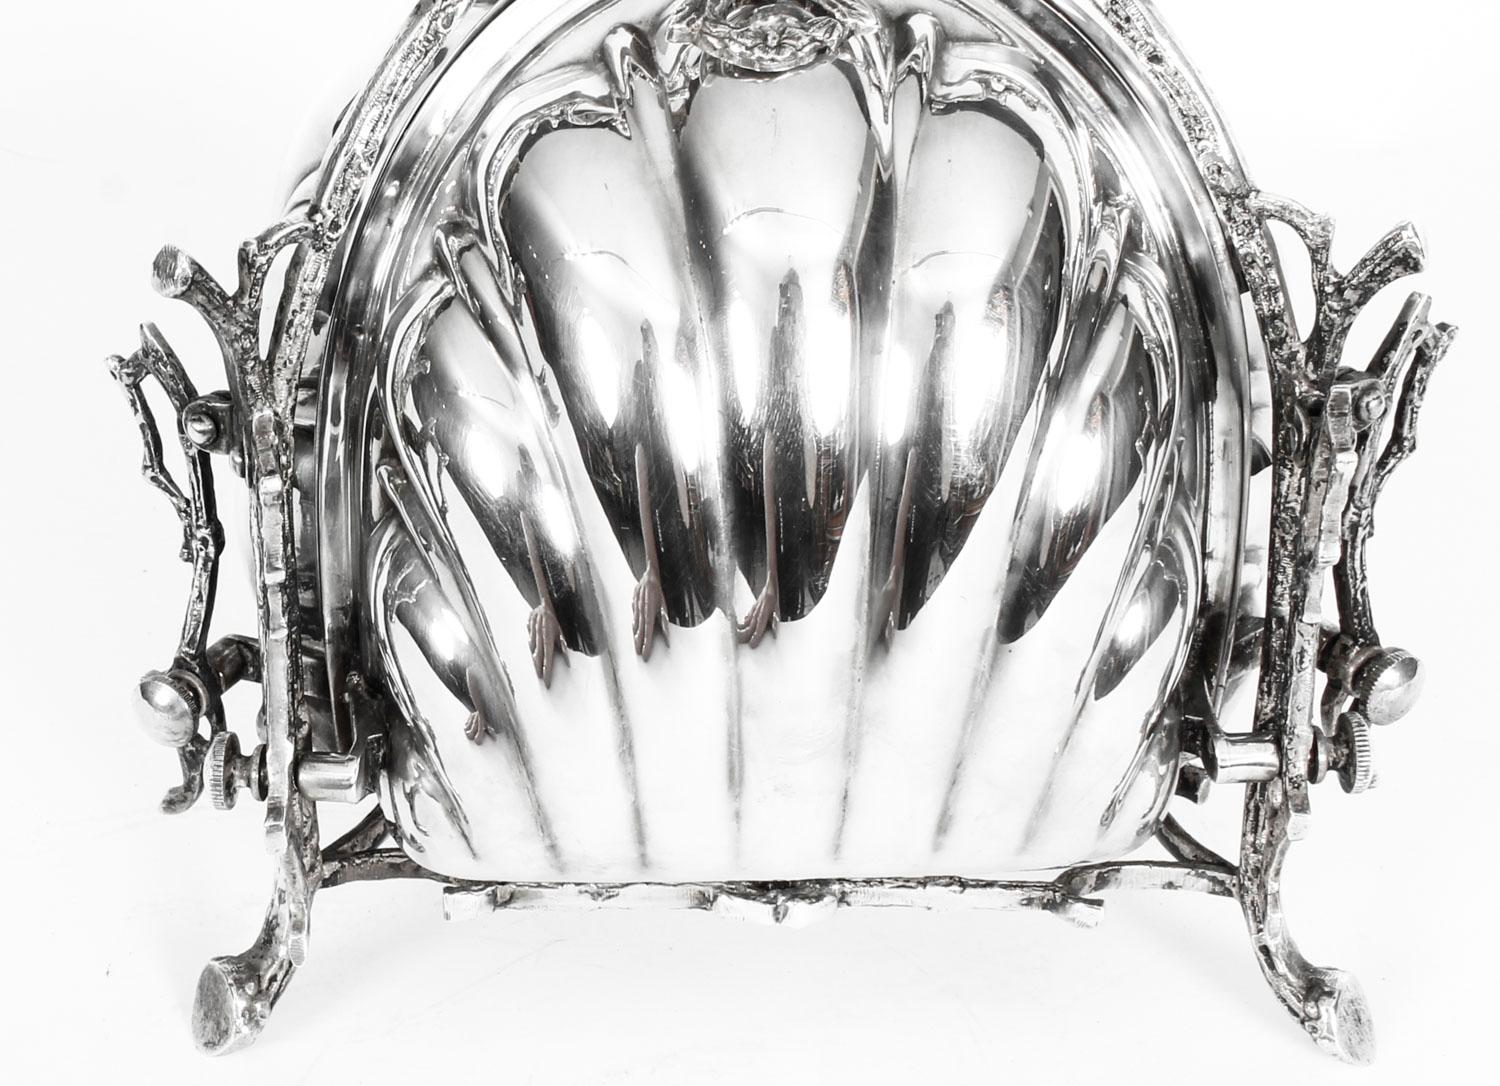 Late 19th Century Antique Silver Plate Triple Shell Shaped Sweets Biscuit Box, 19th Century